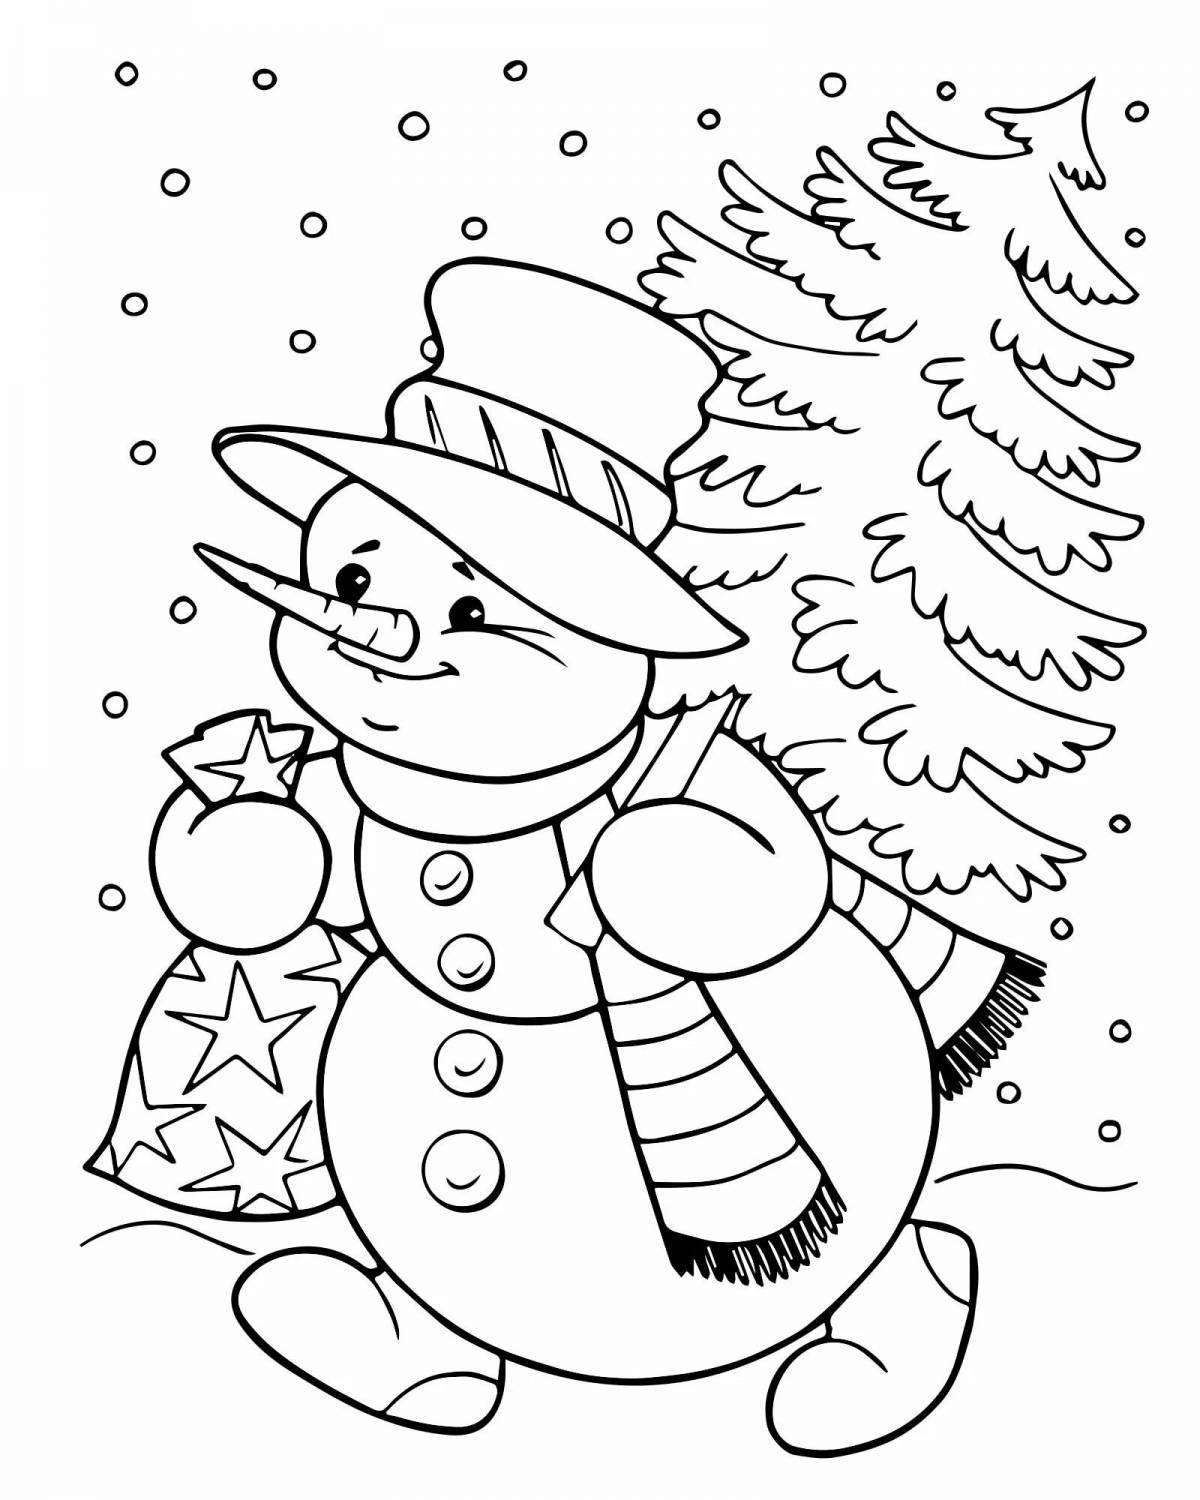 Animated tree and snowman coloring book